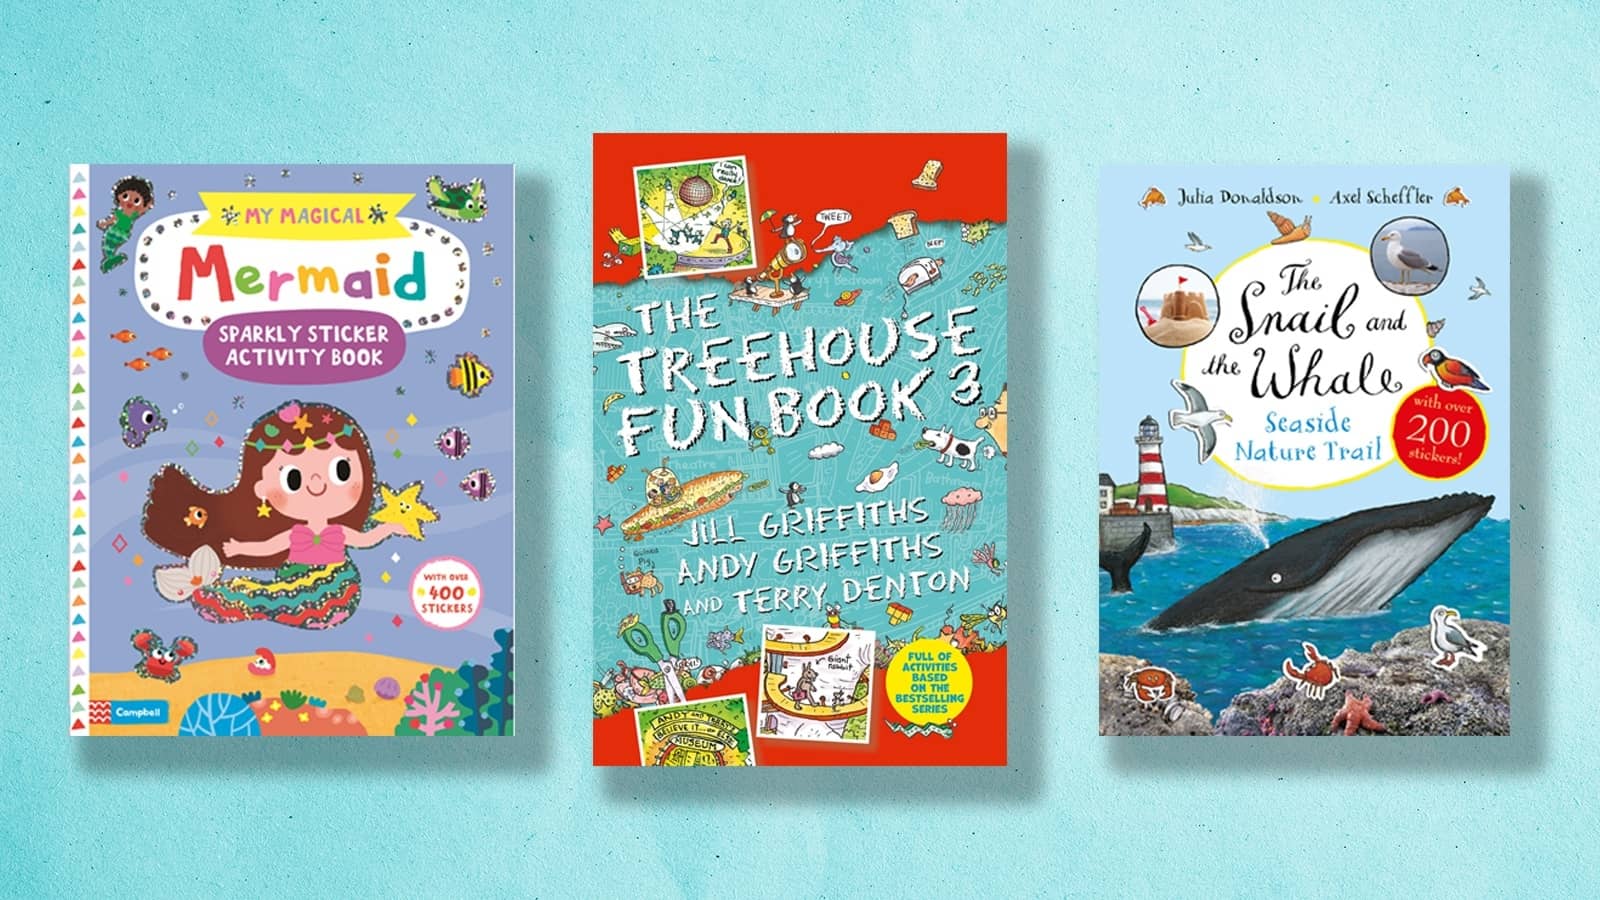 Book covers for My Magical Mermaid, The Treehouse Fun Book 3 and The Snail and The Whale seaside Nature Trail on a blue background